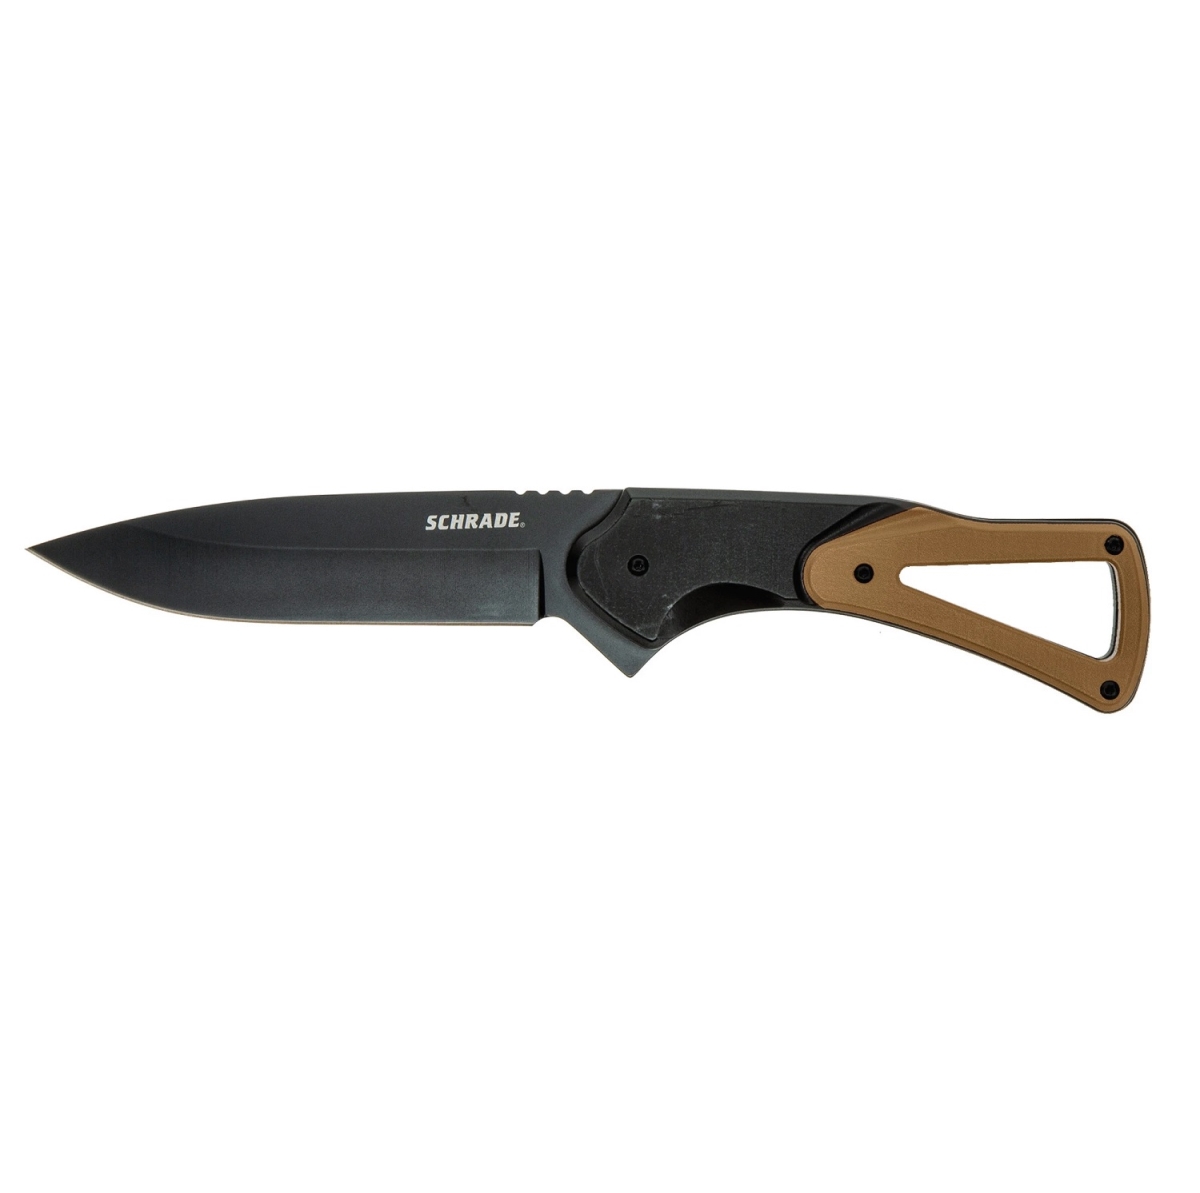 4020128 4 in. Fixed Drop Point Blade GFN Handle Knife